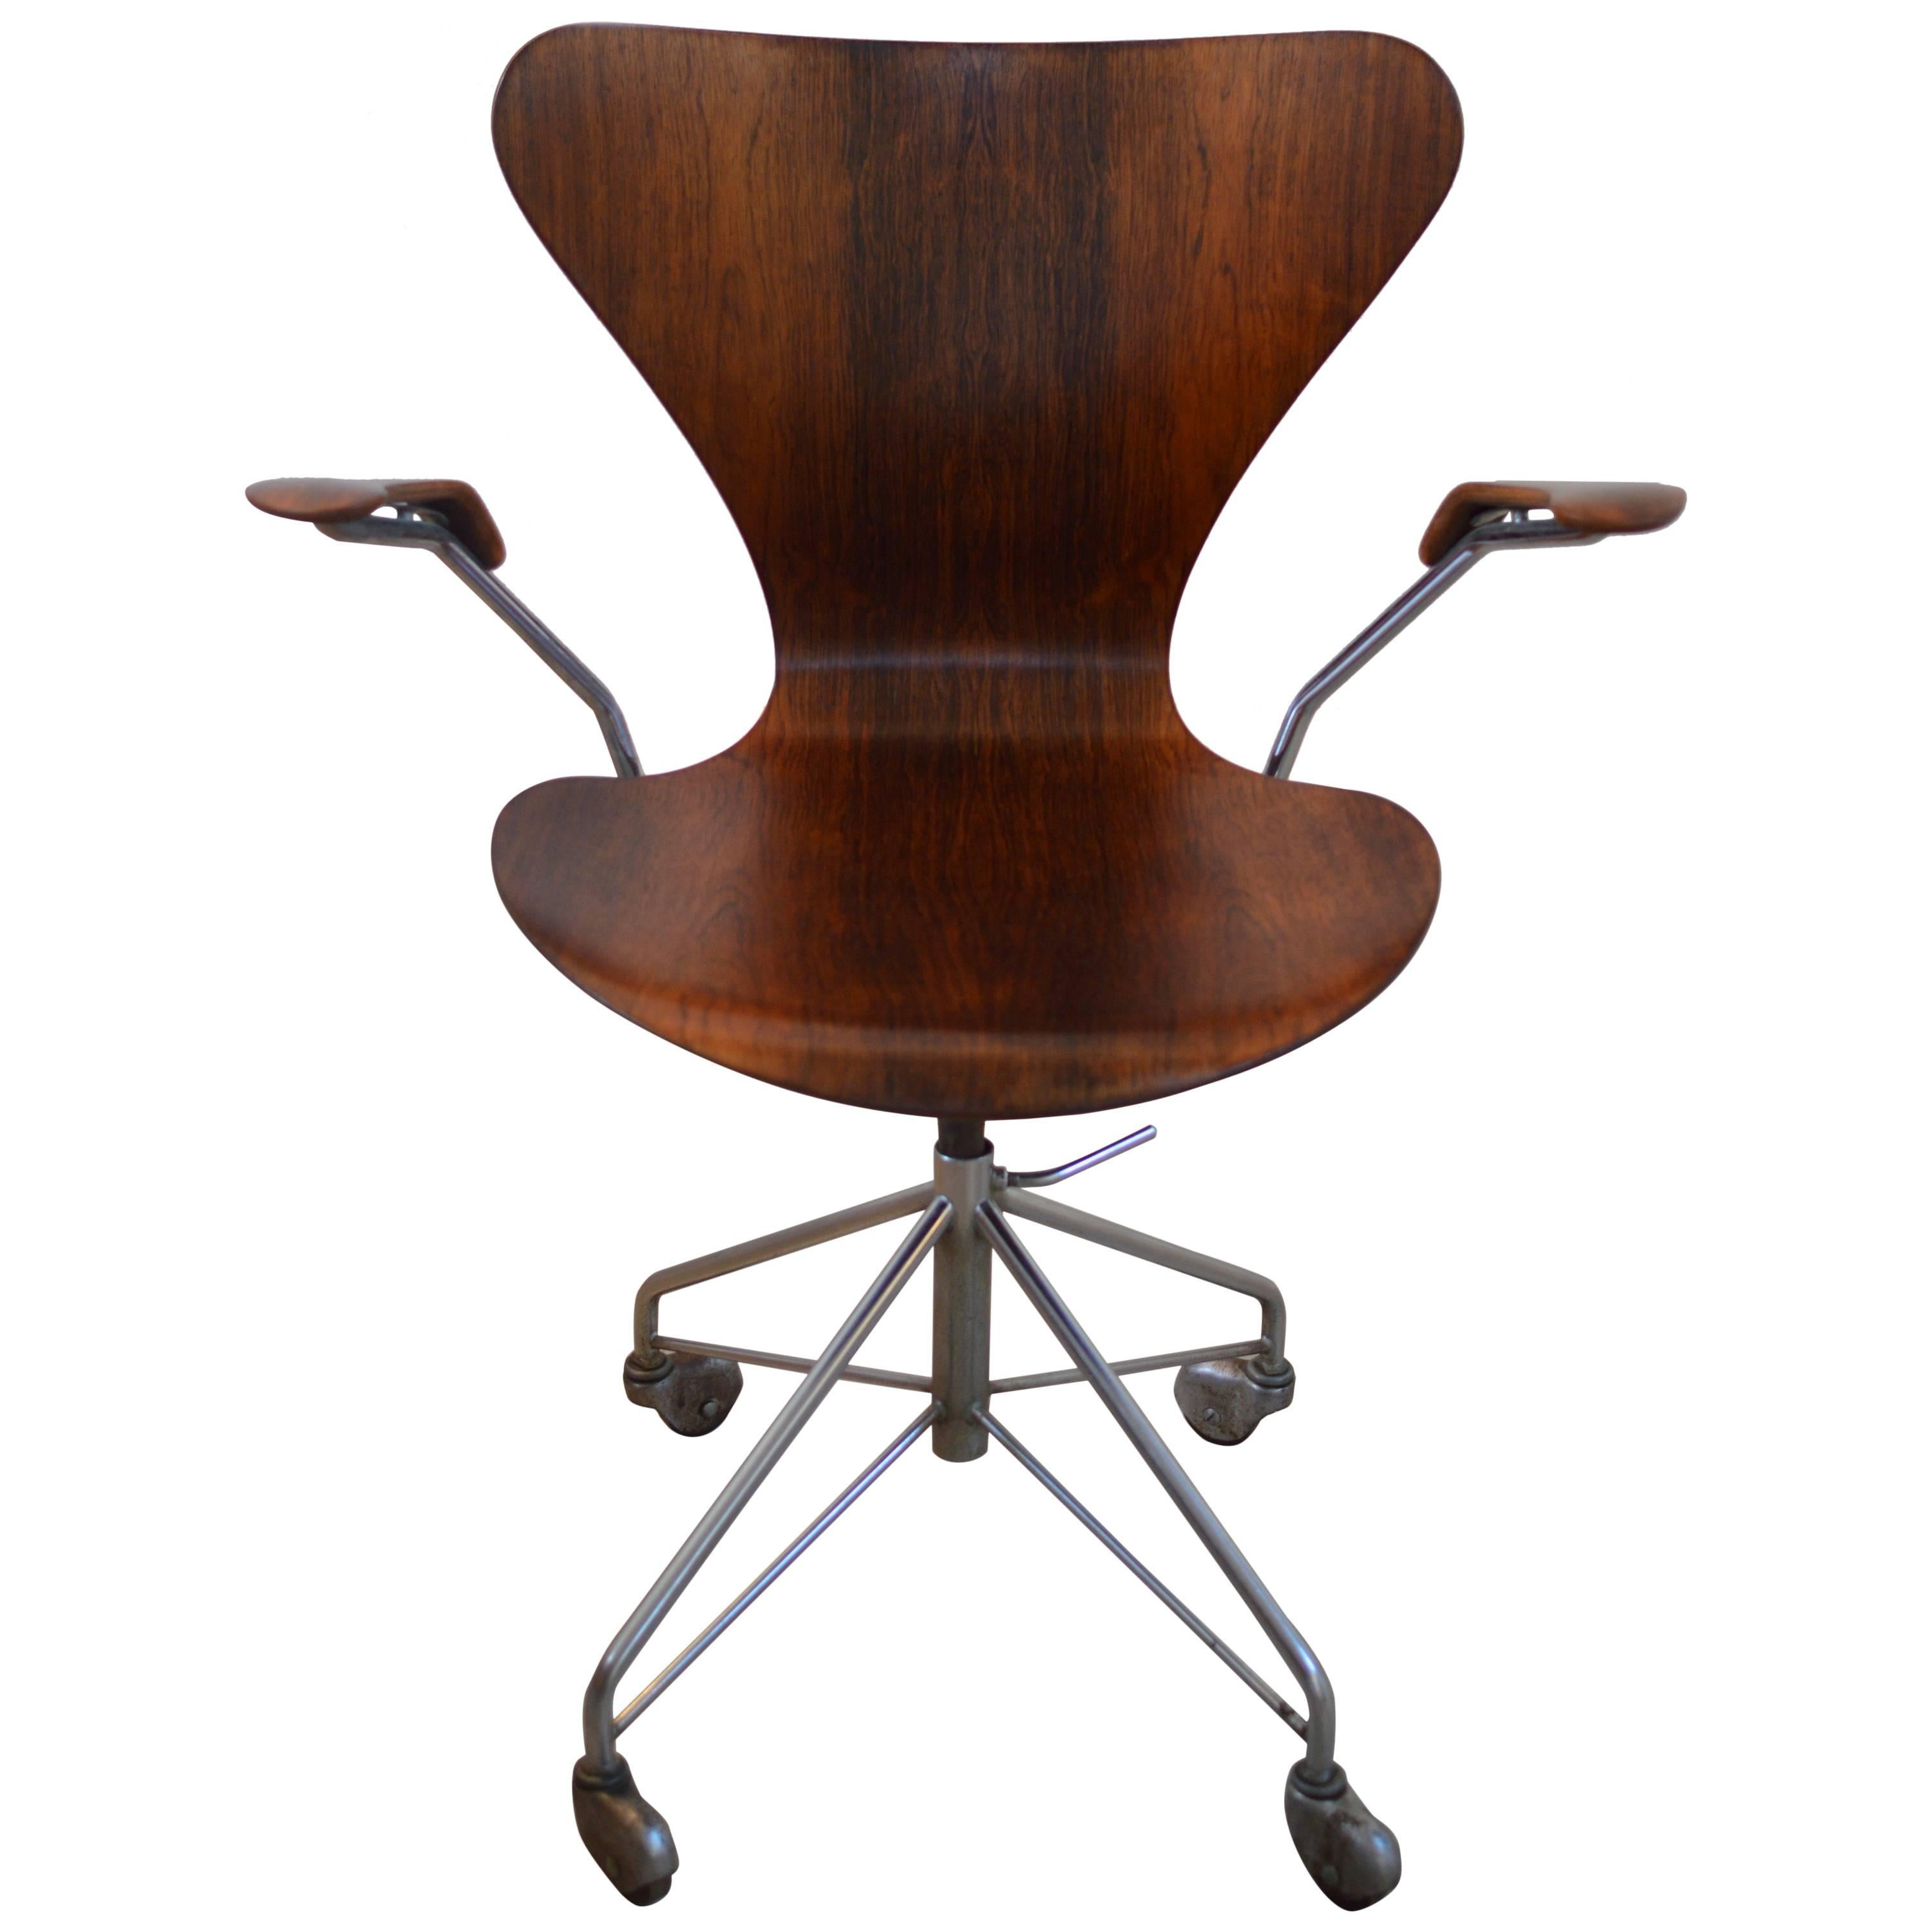 Rare Arne Jacobsen Rosewood Swivel Desk Chair with Arms